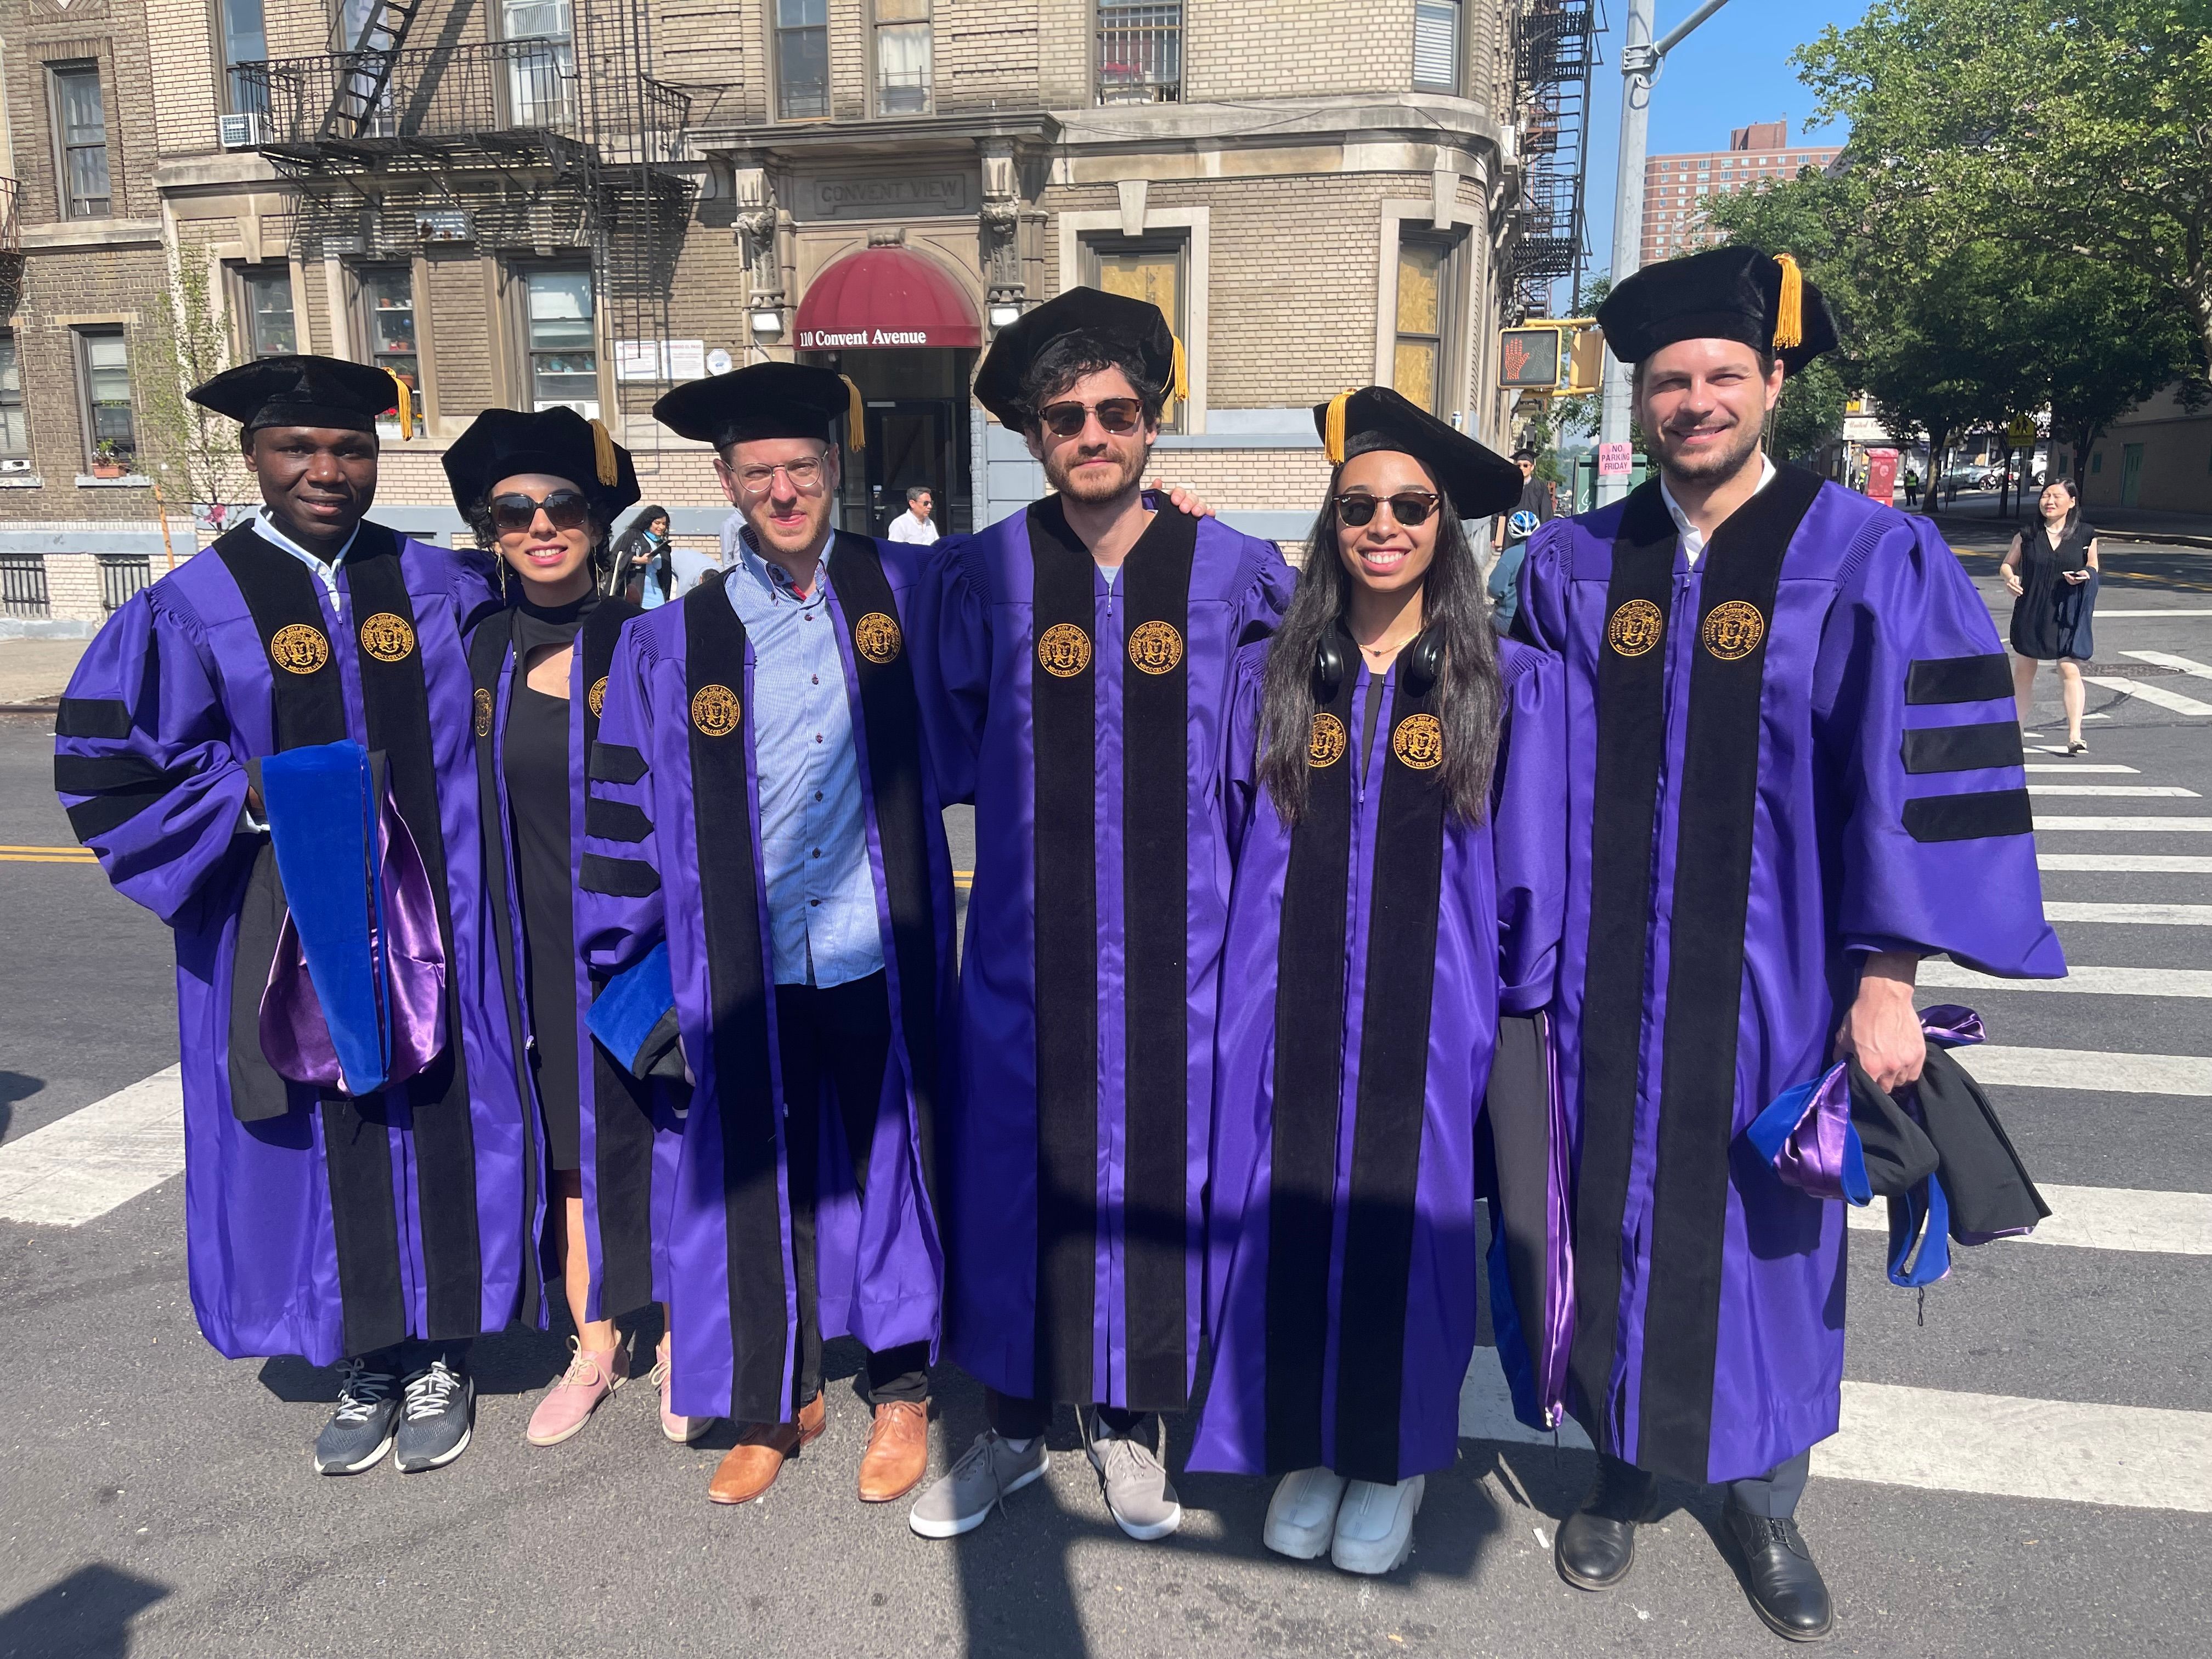 2023 BME PhD graduates, pictures from left to right: (Adantchede Louis Zannou, Forouzan Vasheghani Farahani, Maximilian Nentwich, Lukas Hirsch, Michelle Gelbs, and Andrea Corti (not pictured, Judy Alper and James Padgett)